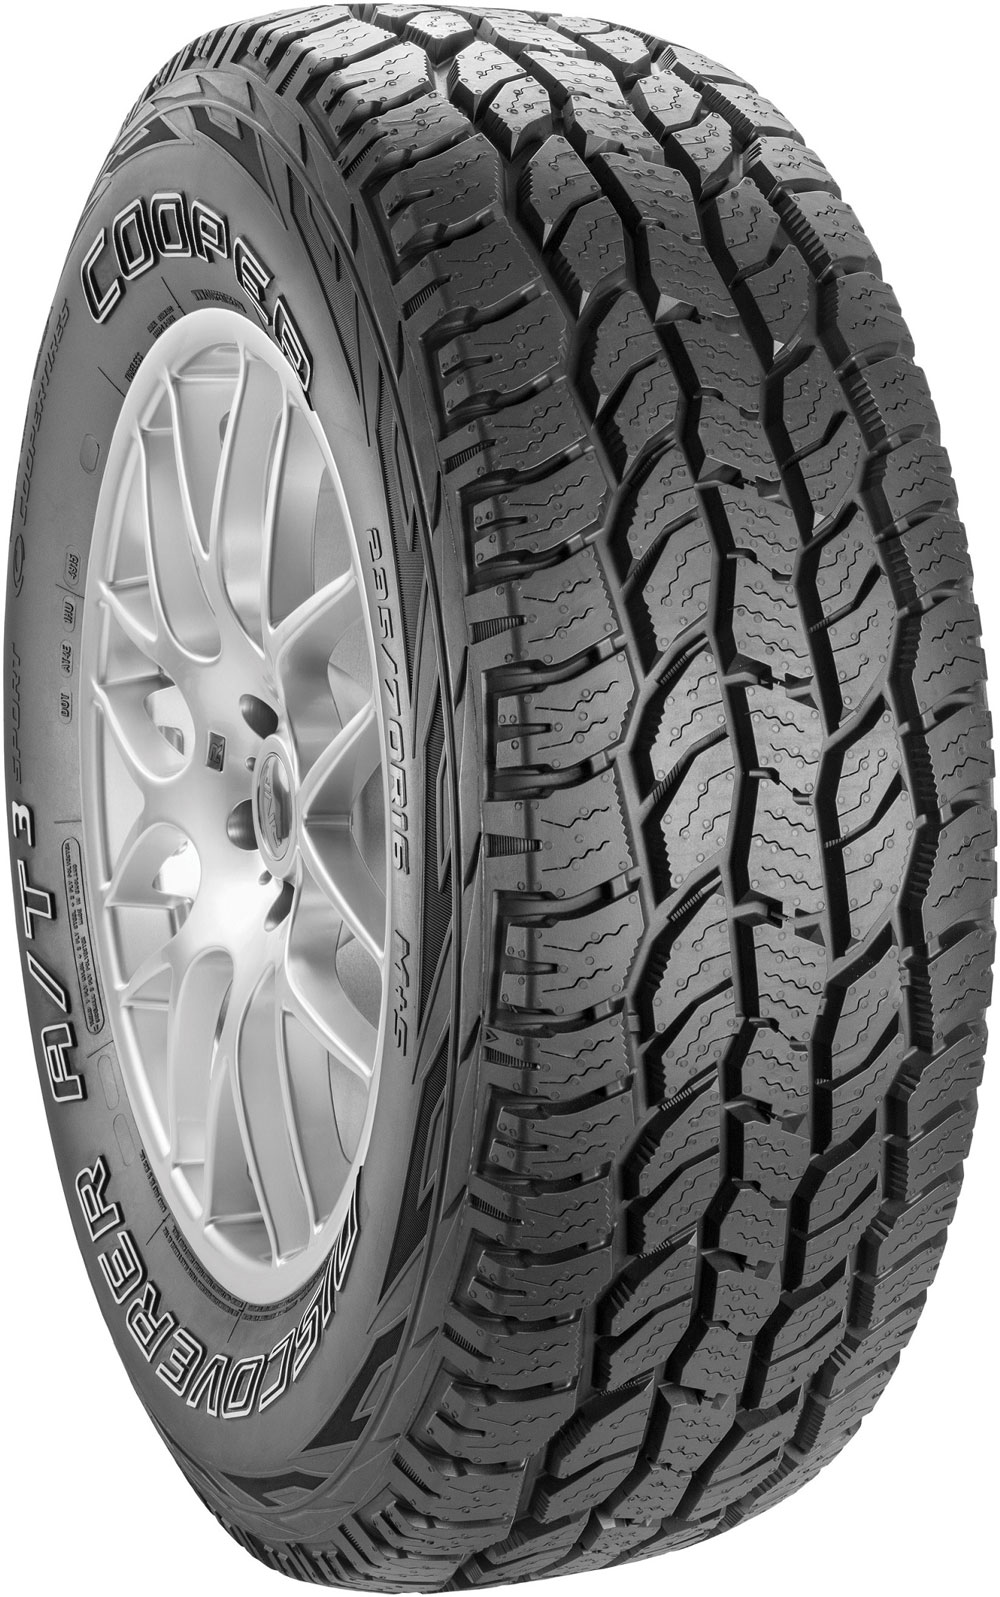 Anvelope jeep COOPER DISCOVERER A/T3 SPORT BSW 205/80 R16 110S